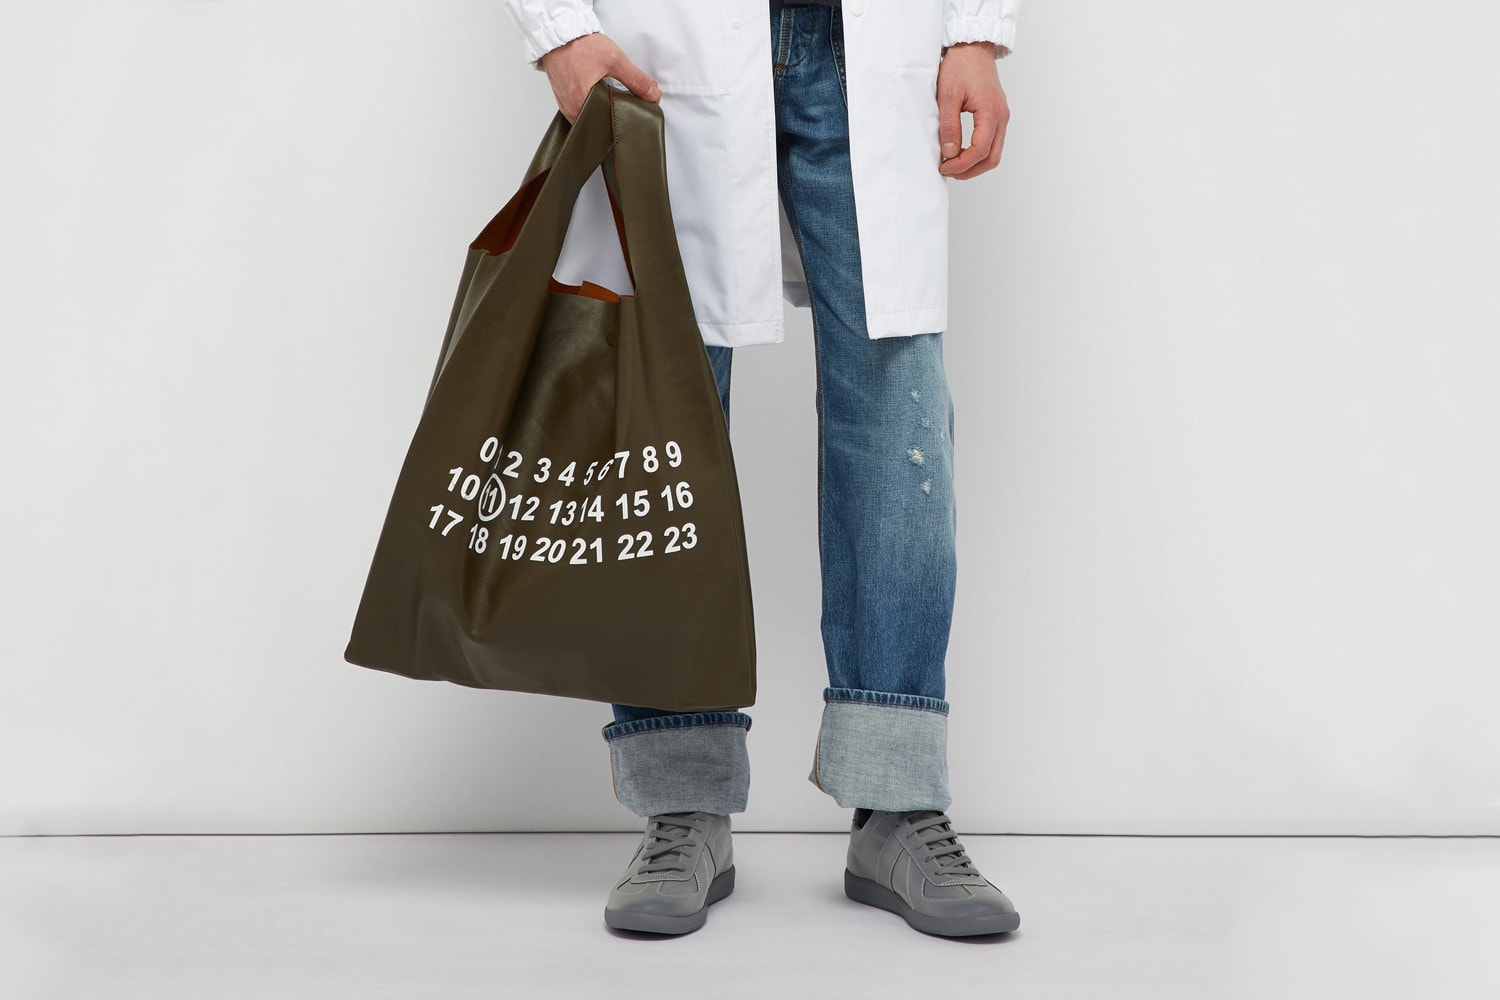 MATCHESFASHION.COM Summer Sale Best Items must buy top Needles Maison Margiela Heron Preston off White JW Anderson a cold wall